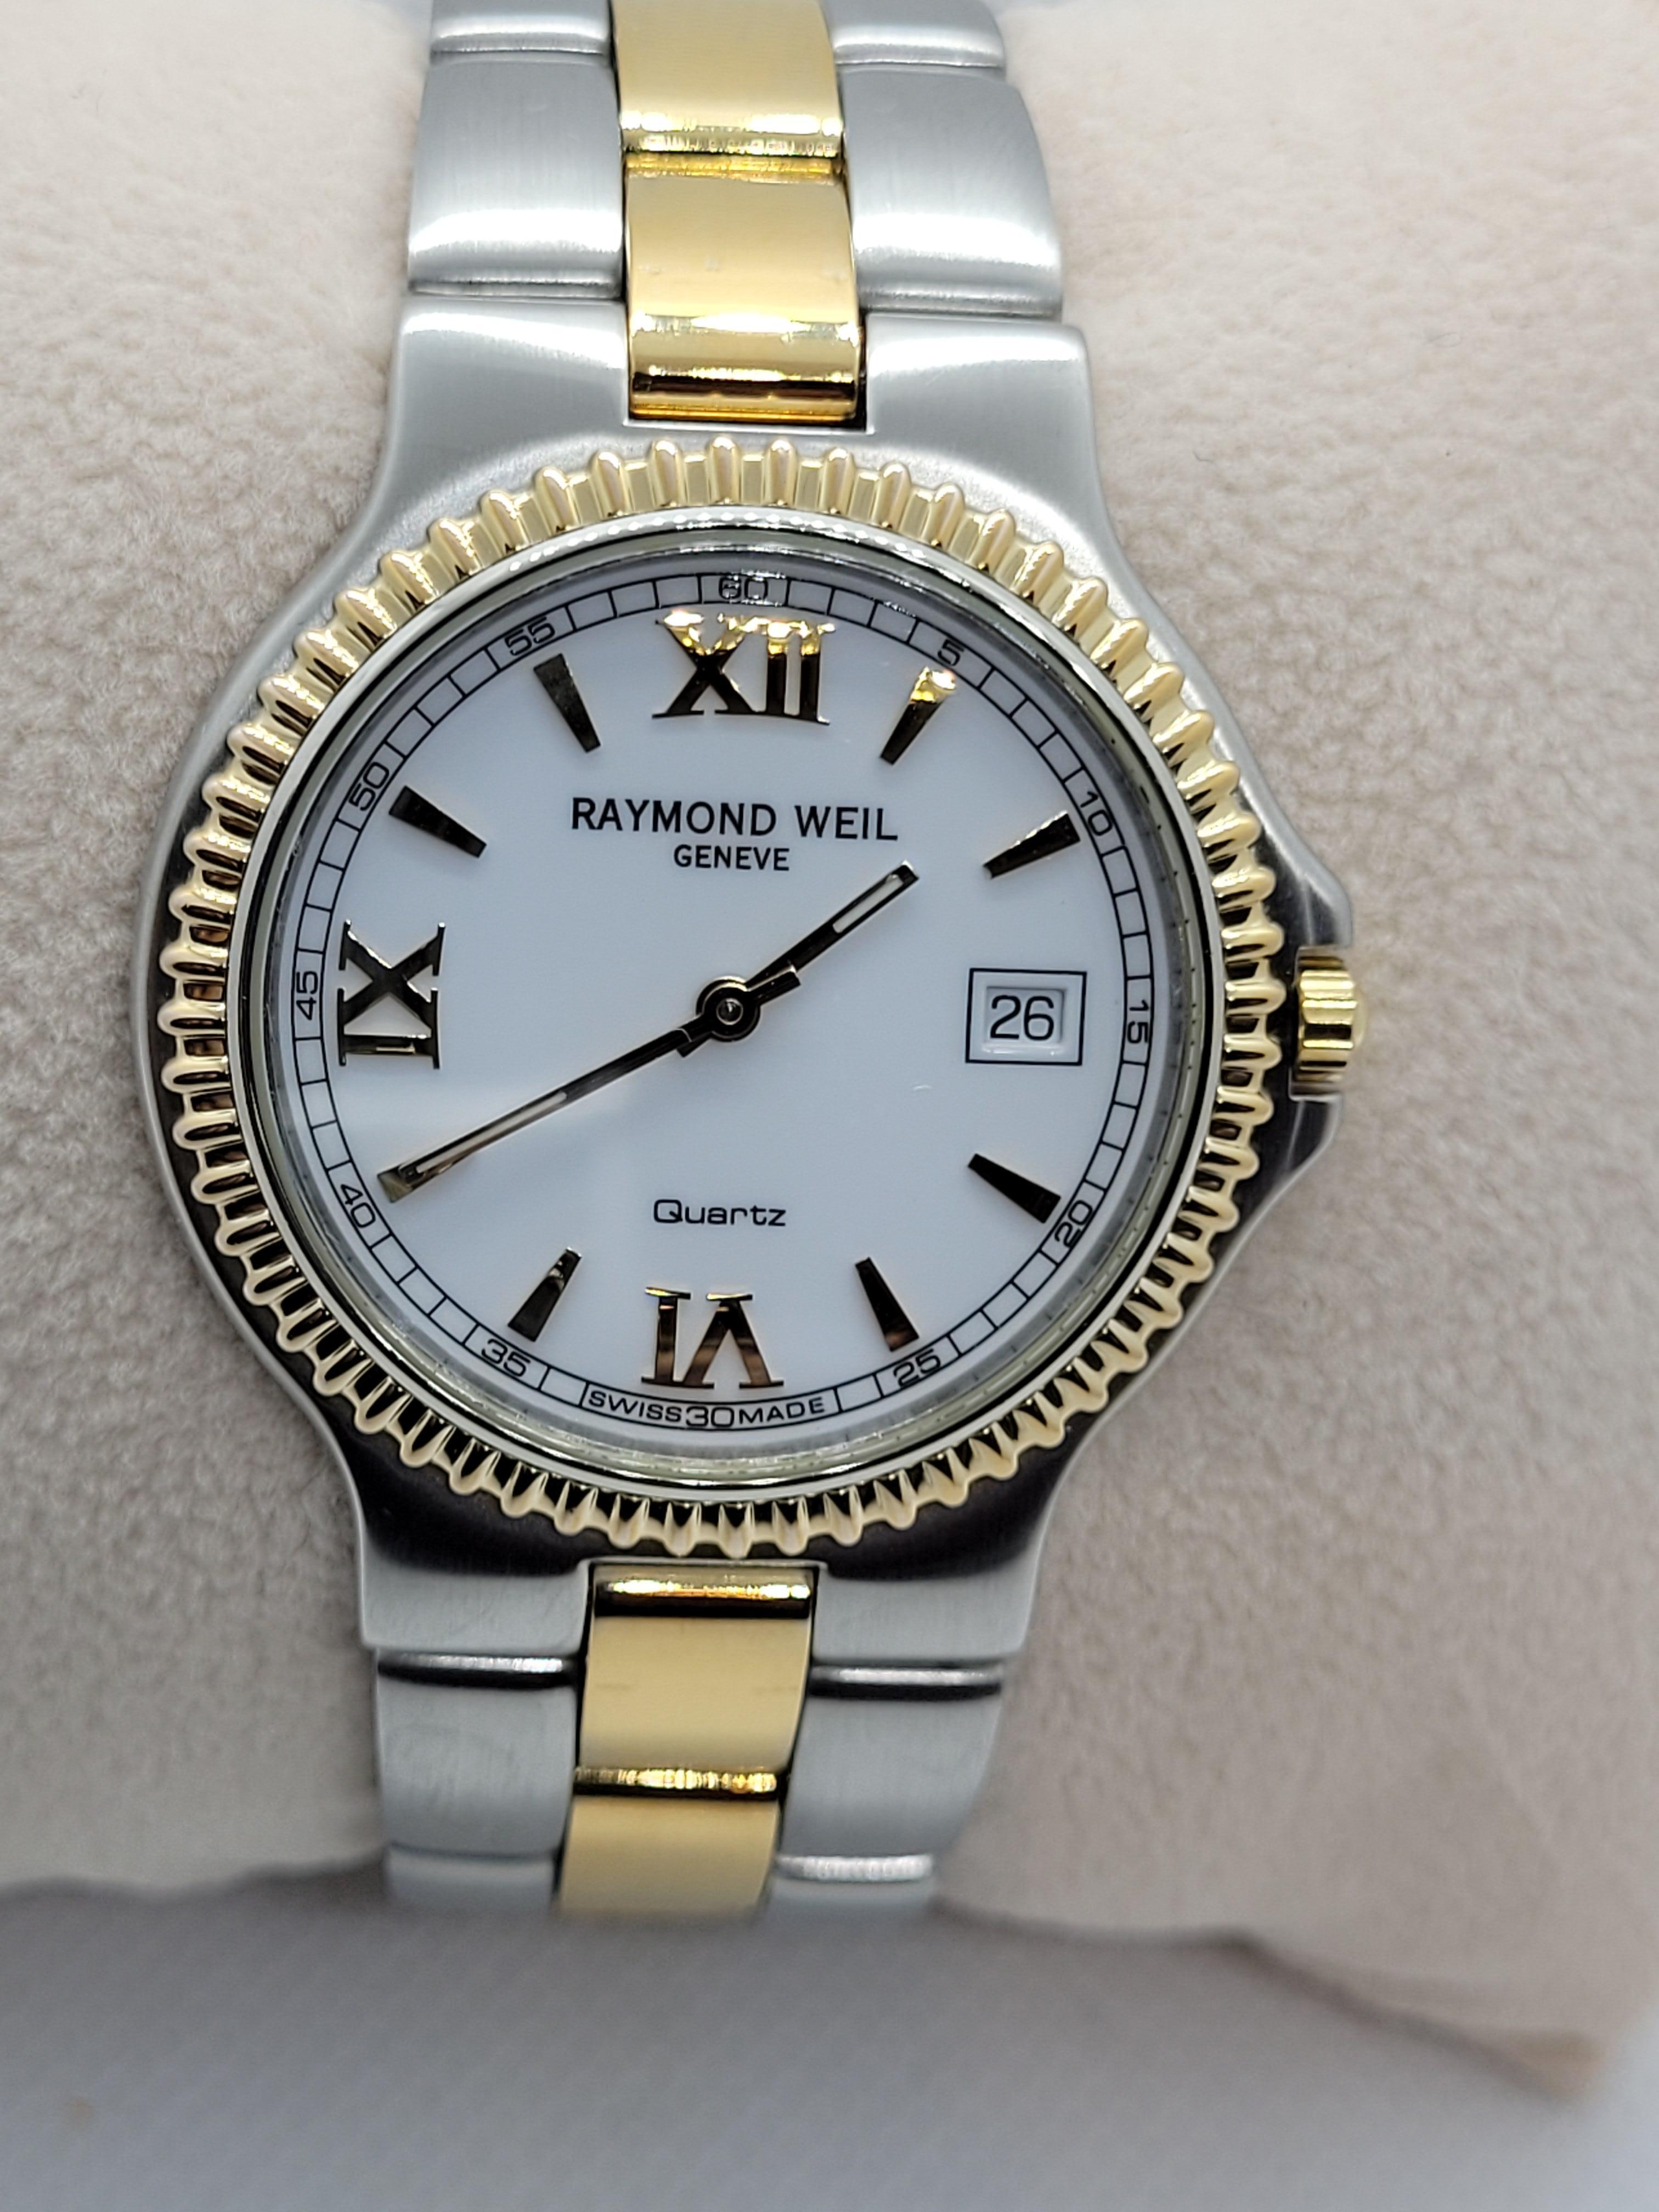 Raymond Weil watch, model number 9280 X565729 in good condition with very few minor scratches, pre-owned with original box. This watch is a great every day watch and also suitable to for dress attire. The watch is stainless steel and 18kt yellow